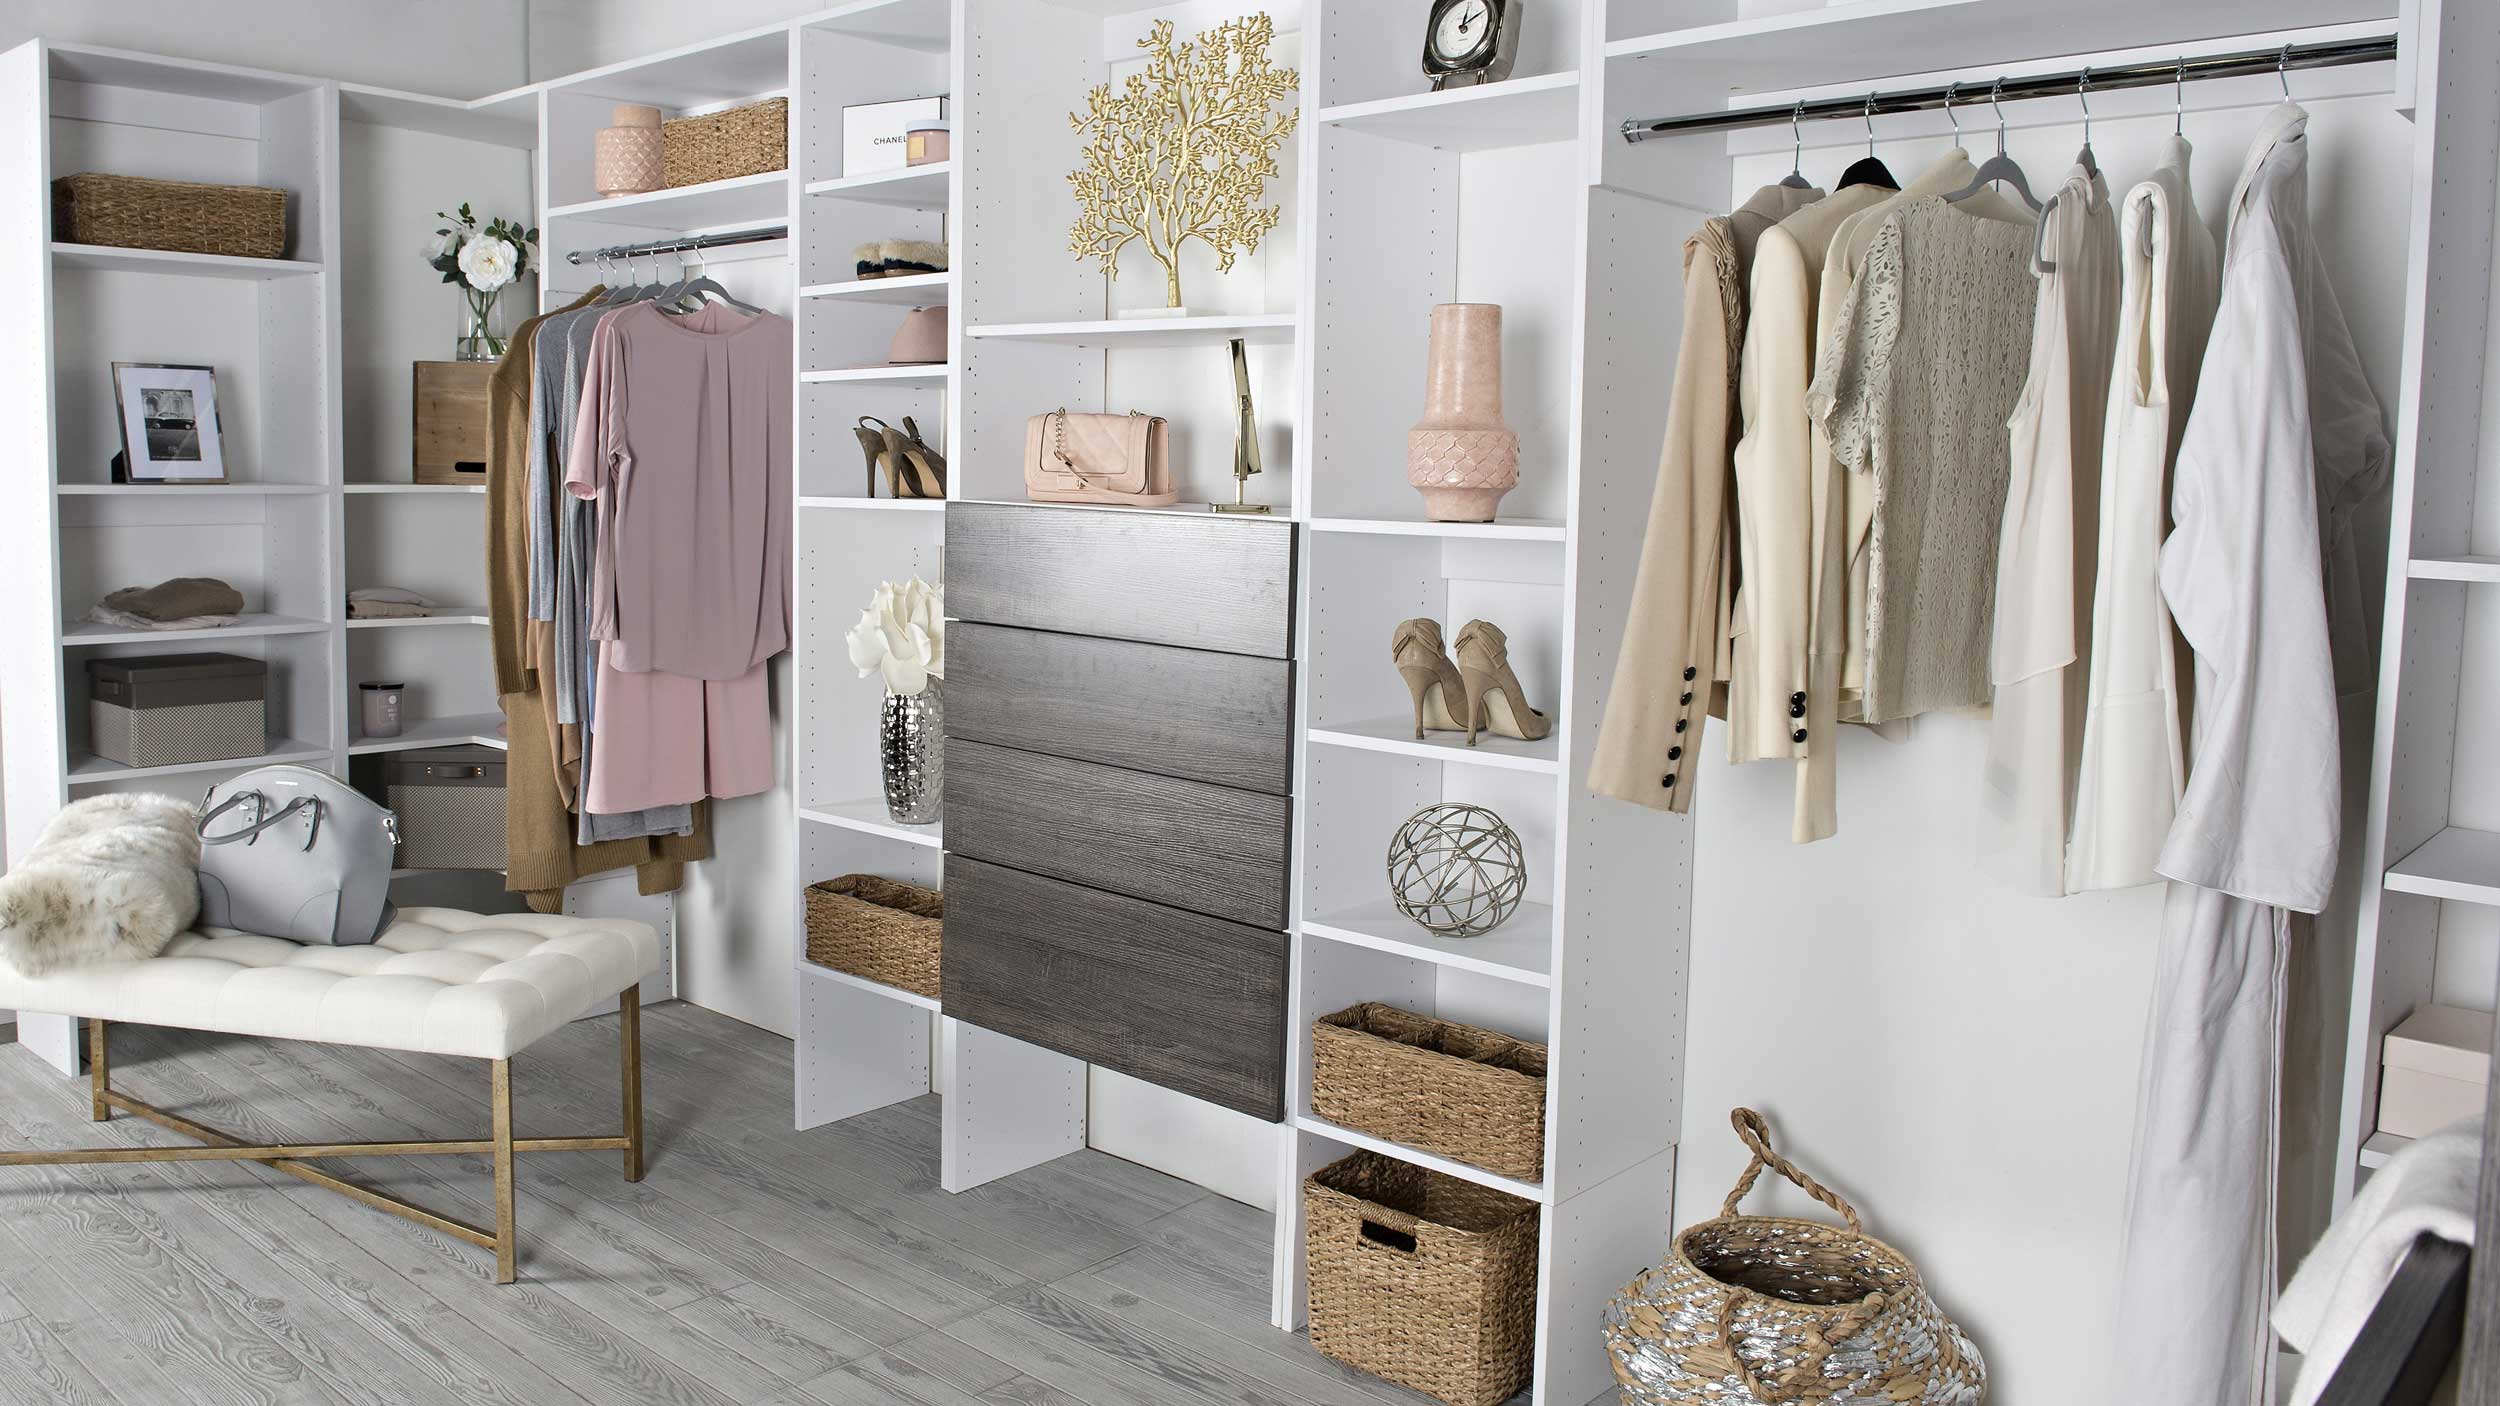 How to Organize your Bedroom Shelves